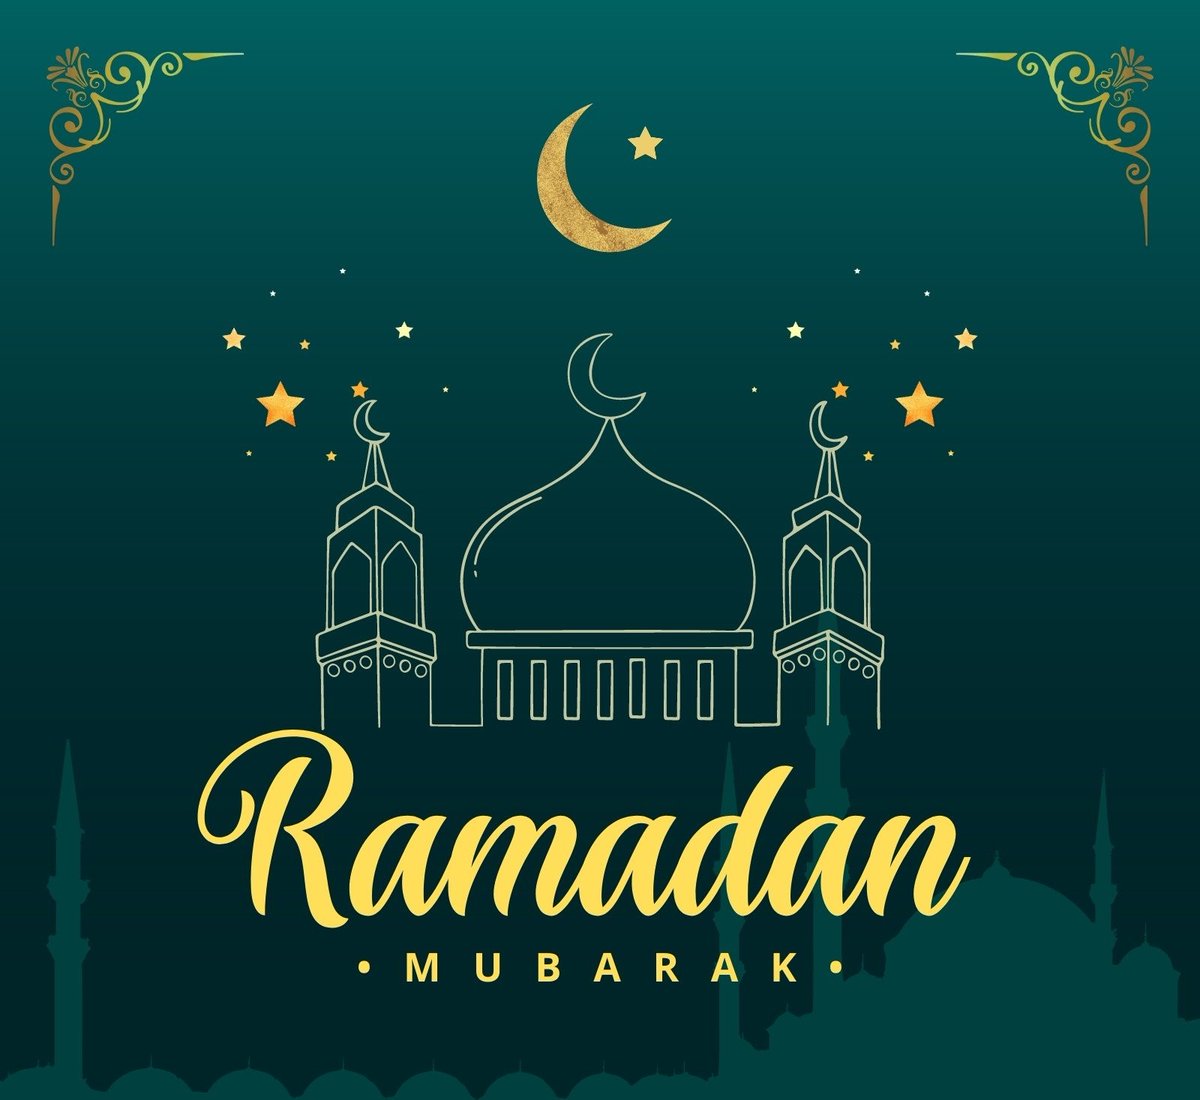 🌙✨ Ramadan Mubarak to my Twitter family! 🌙✨ Wishing you a month filled with reflection, peace, and blessings. May your days be touched by gratitude, prayers answered, and actions guided by kindness. Let's strengthen our connections and spread unity. 🌙 🤝🏻#ramadanmubarak